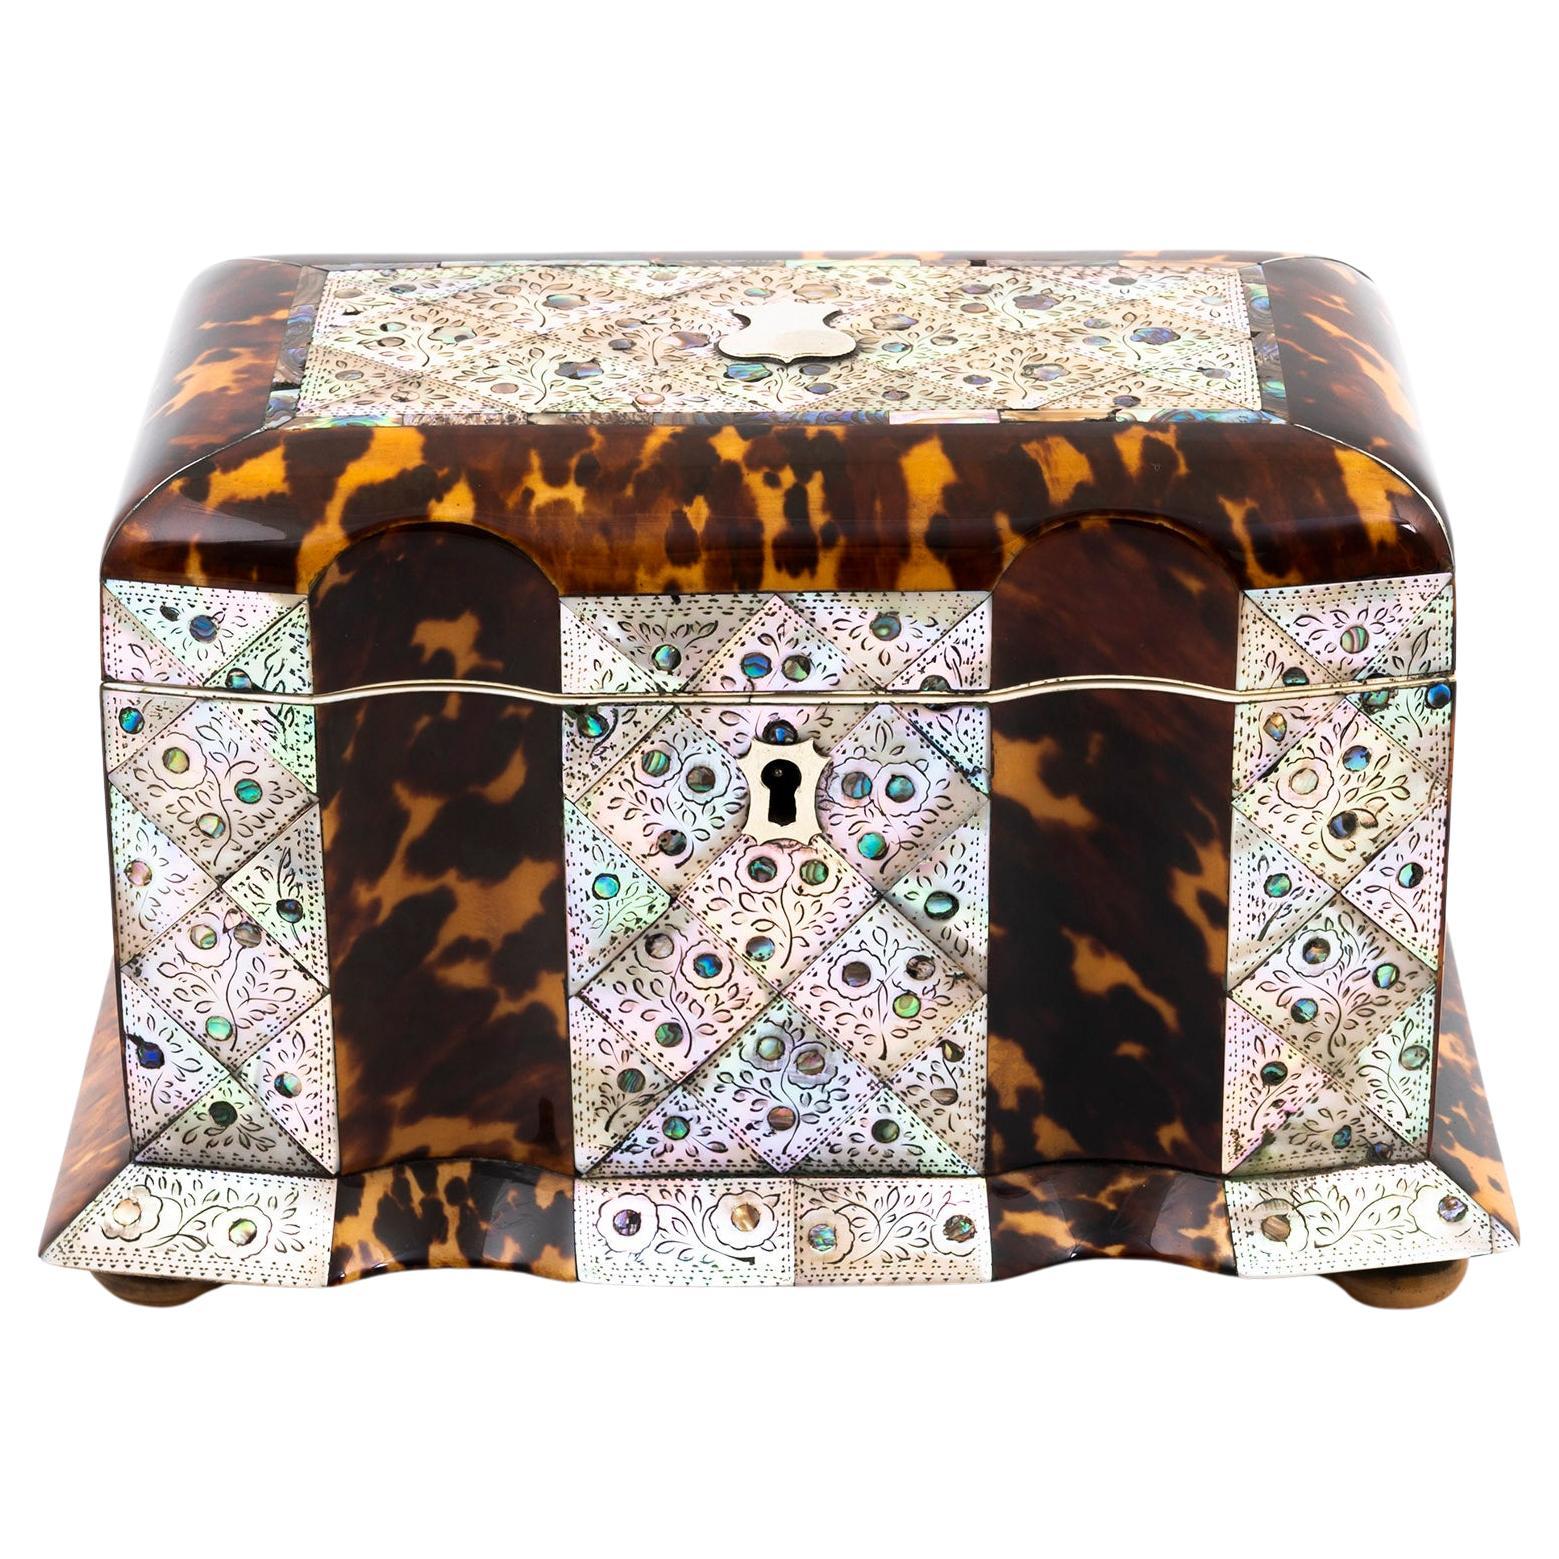 Regency Tortoiseshell and Mother of Pearl Serpentine Tea Caddy